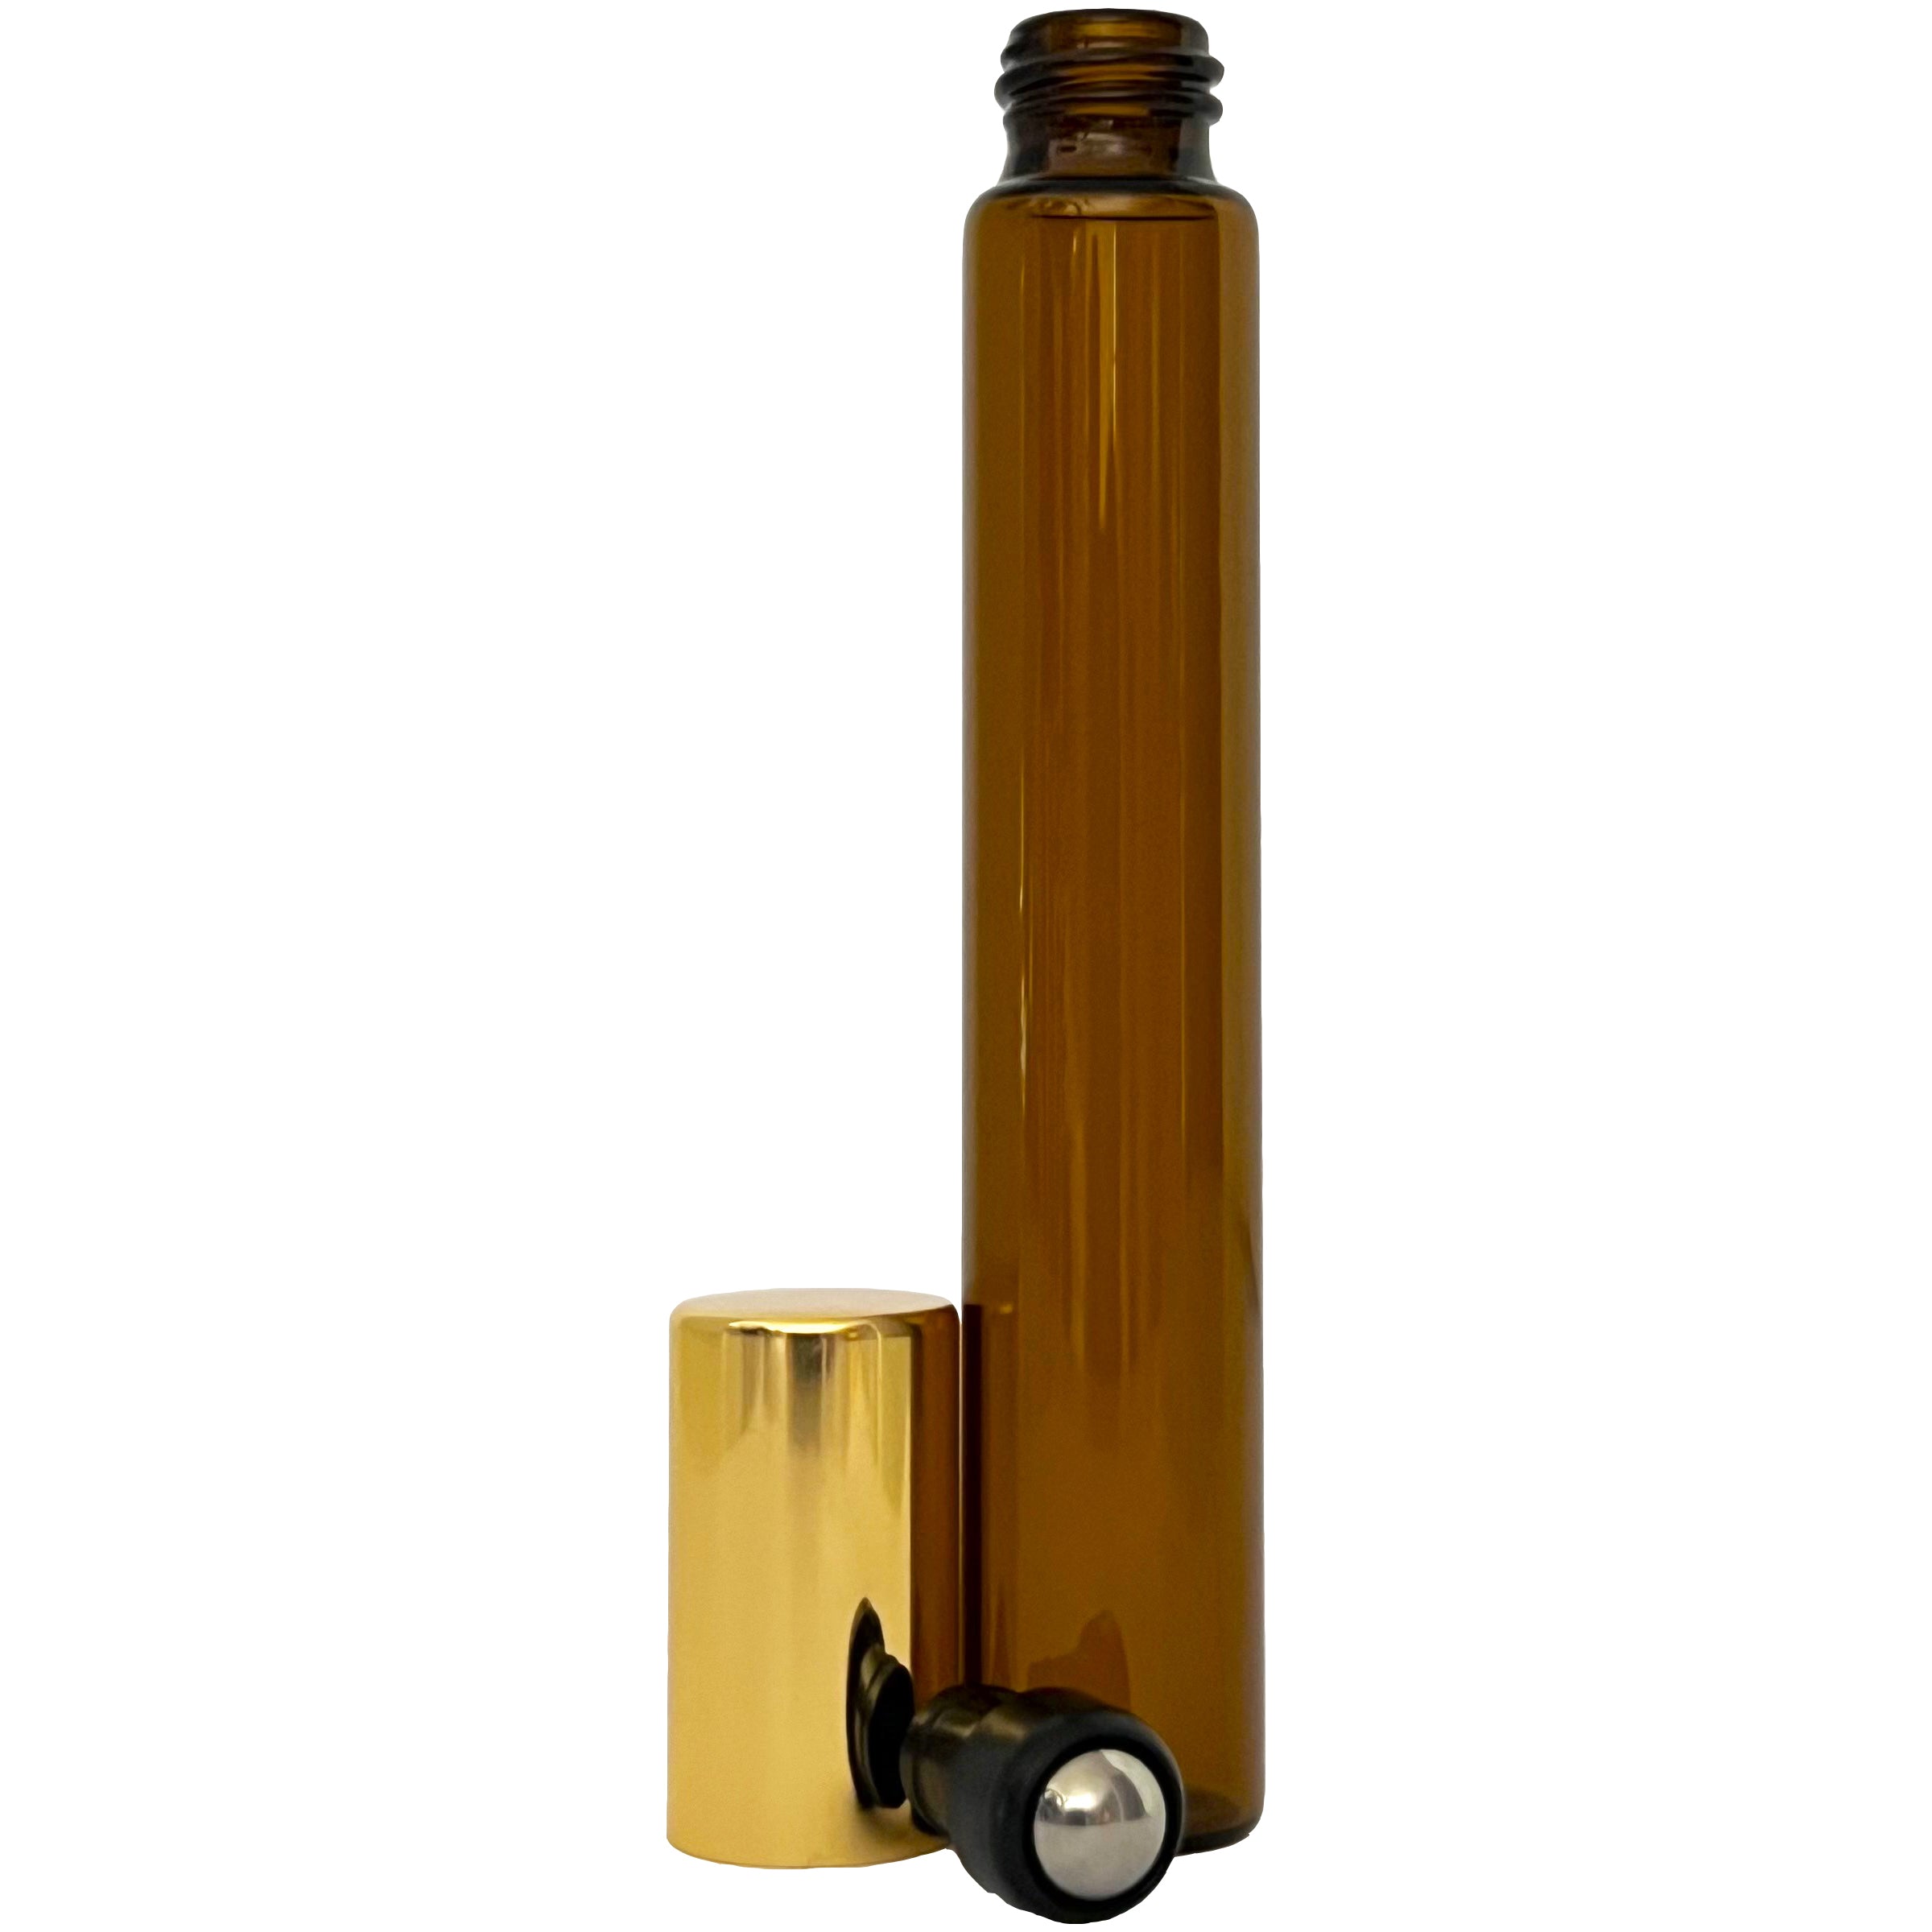 10ml 0.33oz Amber Gold Tall Glass Roll On Roller Bottle Perfume Essential Oils